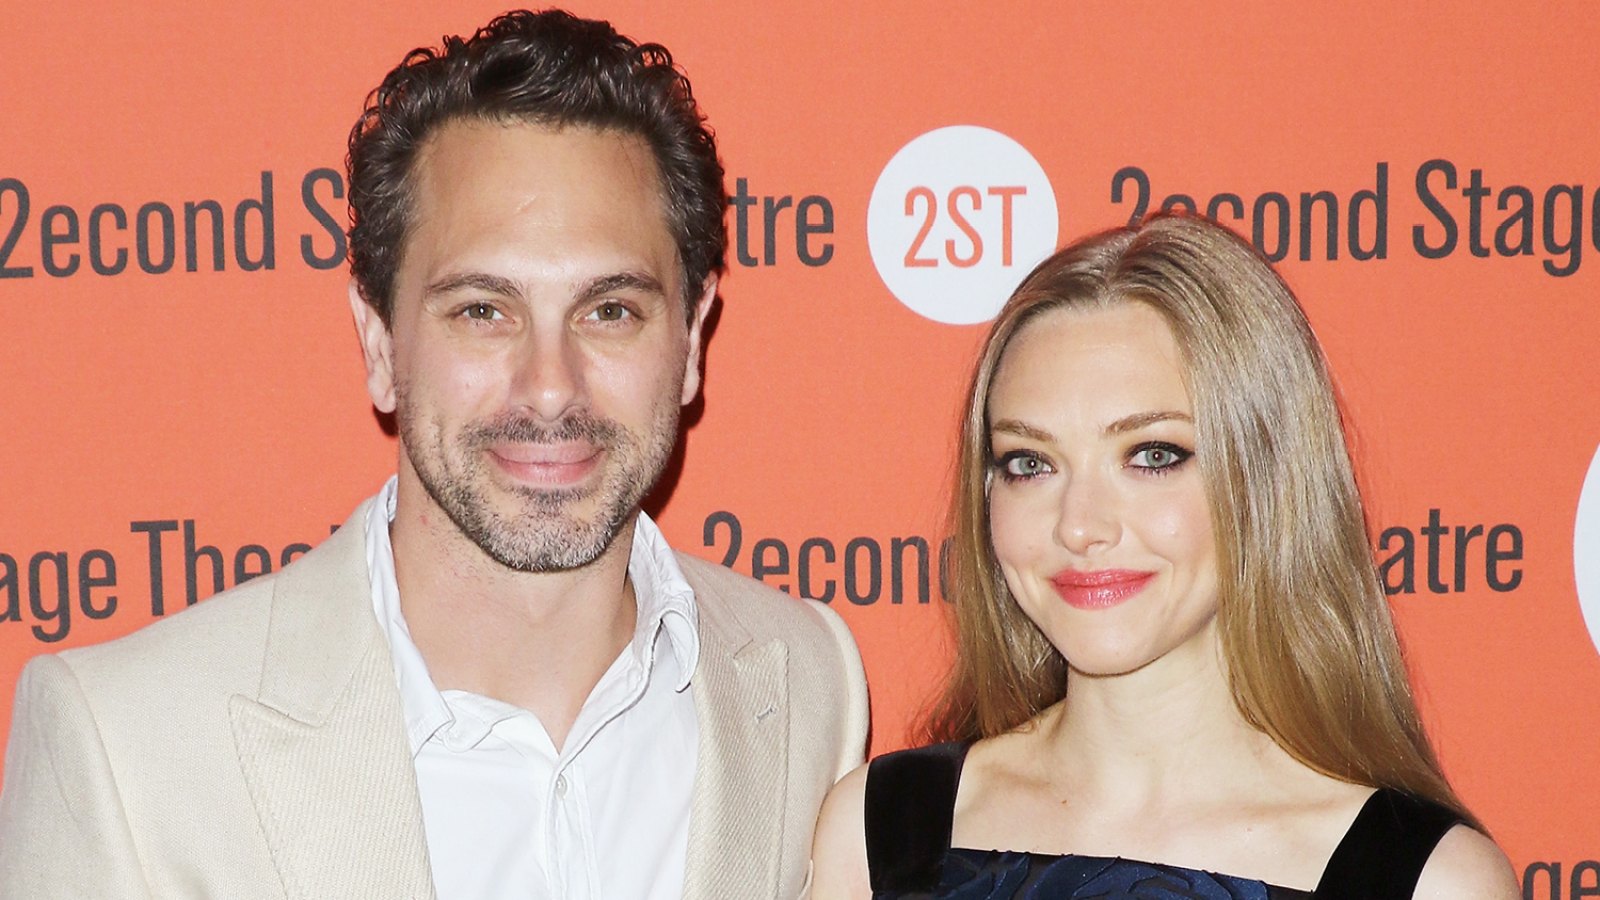 Thomas Sadoski and Amanda Seyfried attend "The Way We Get By" opening night after party at Four at Yotel on May 19, 2015 in New York City.